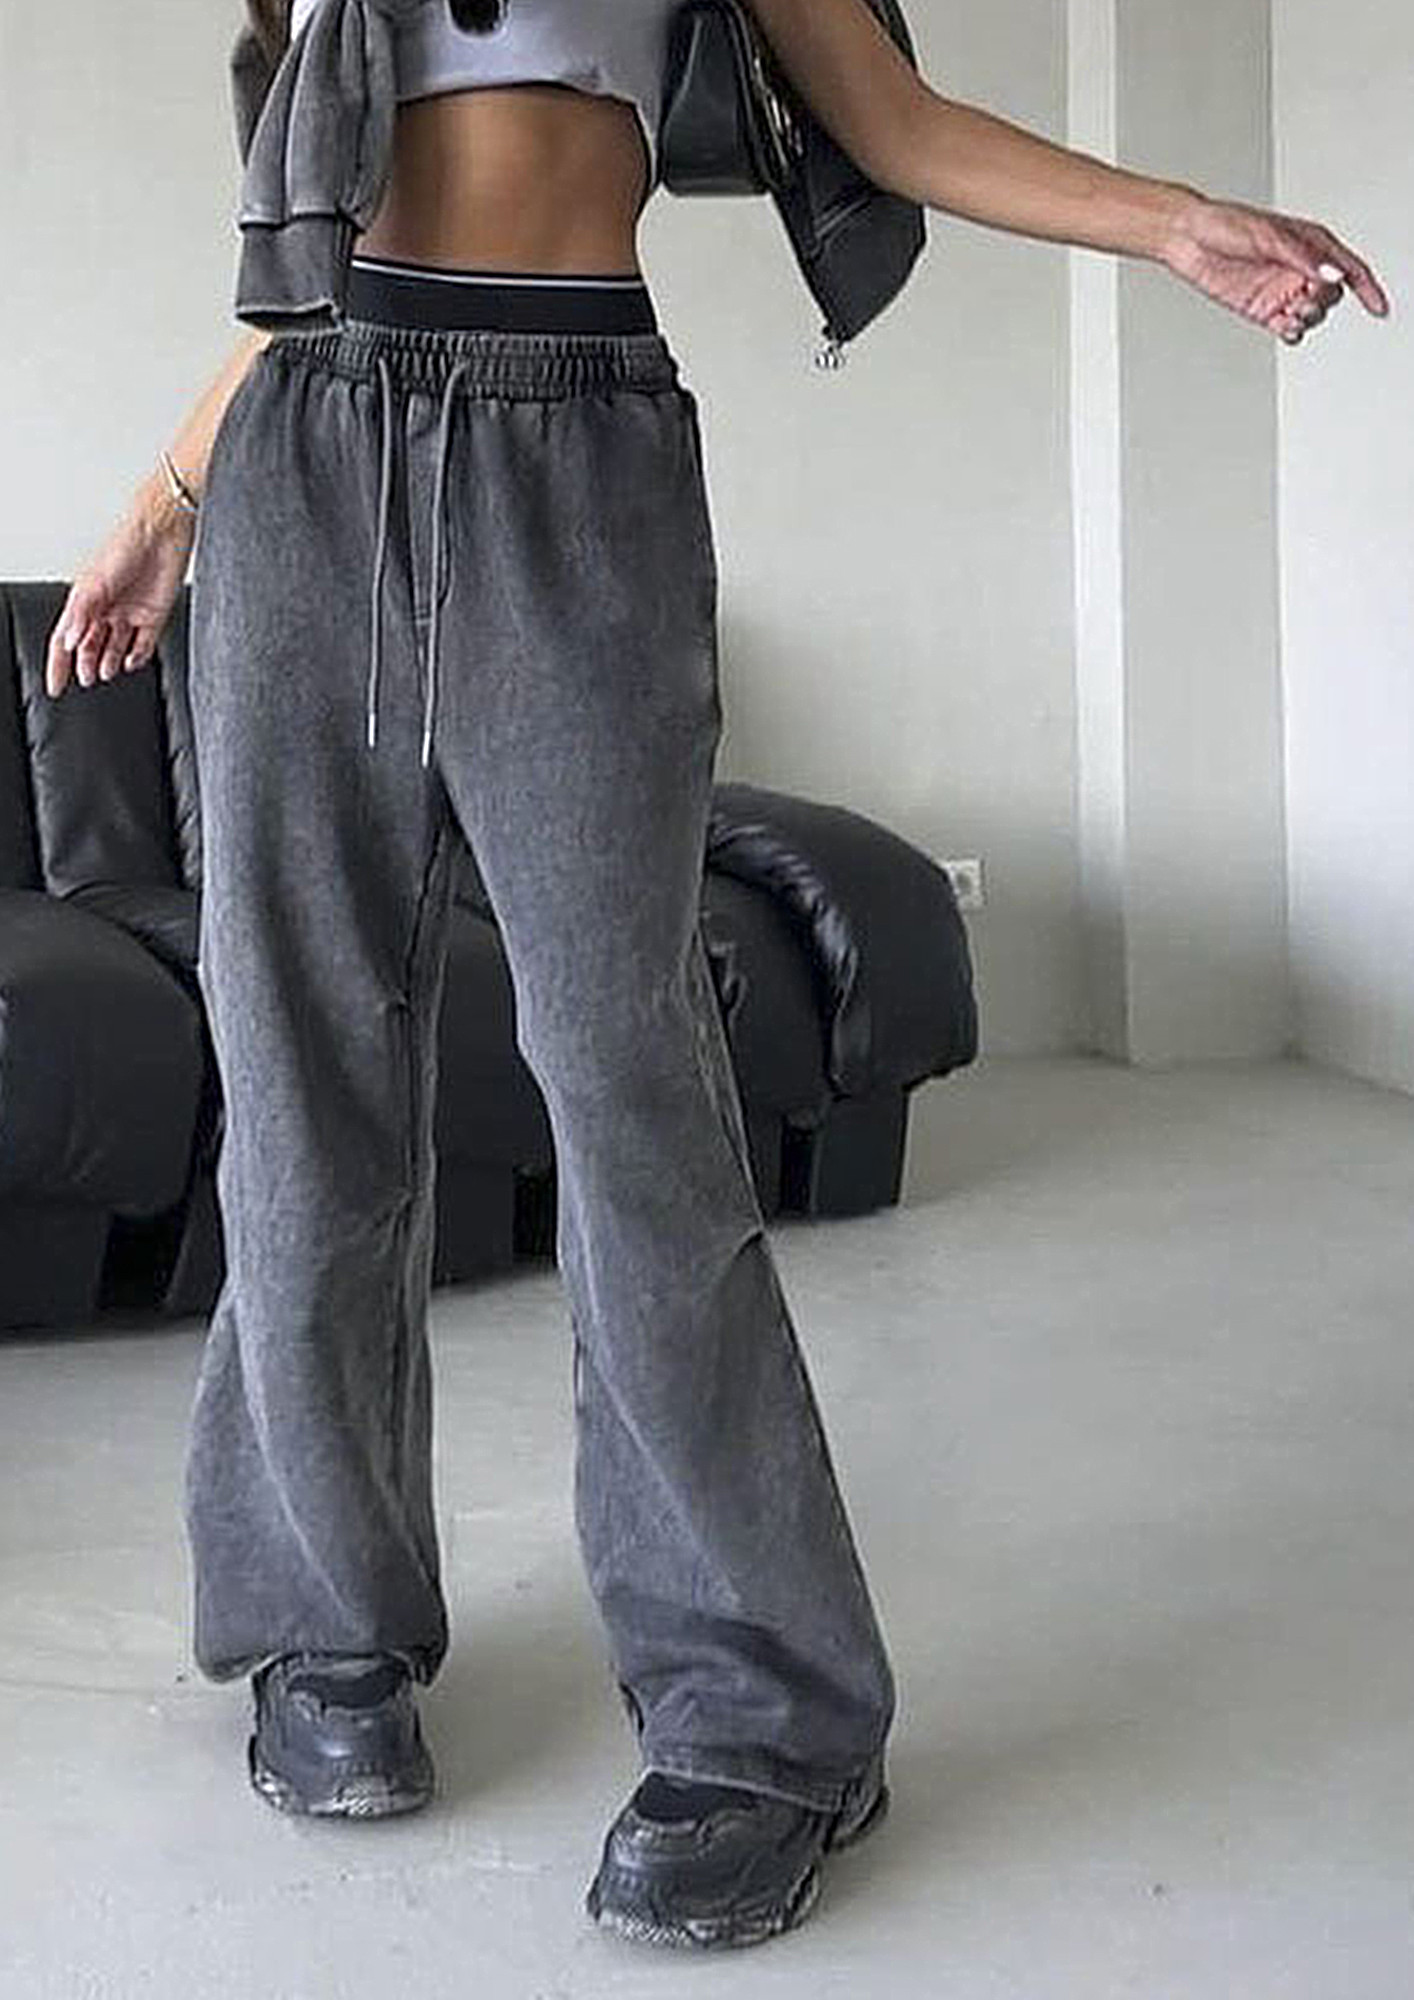 Wide joggers